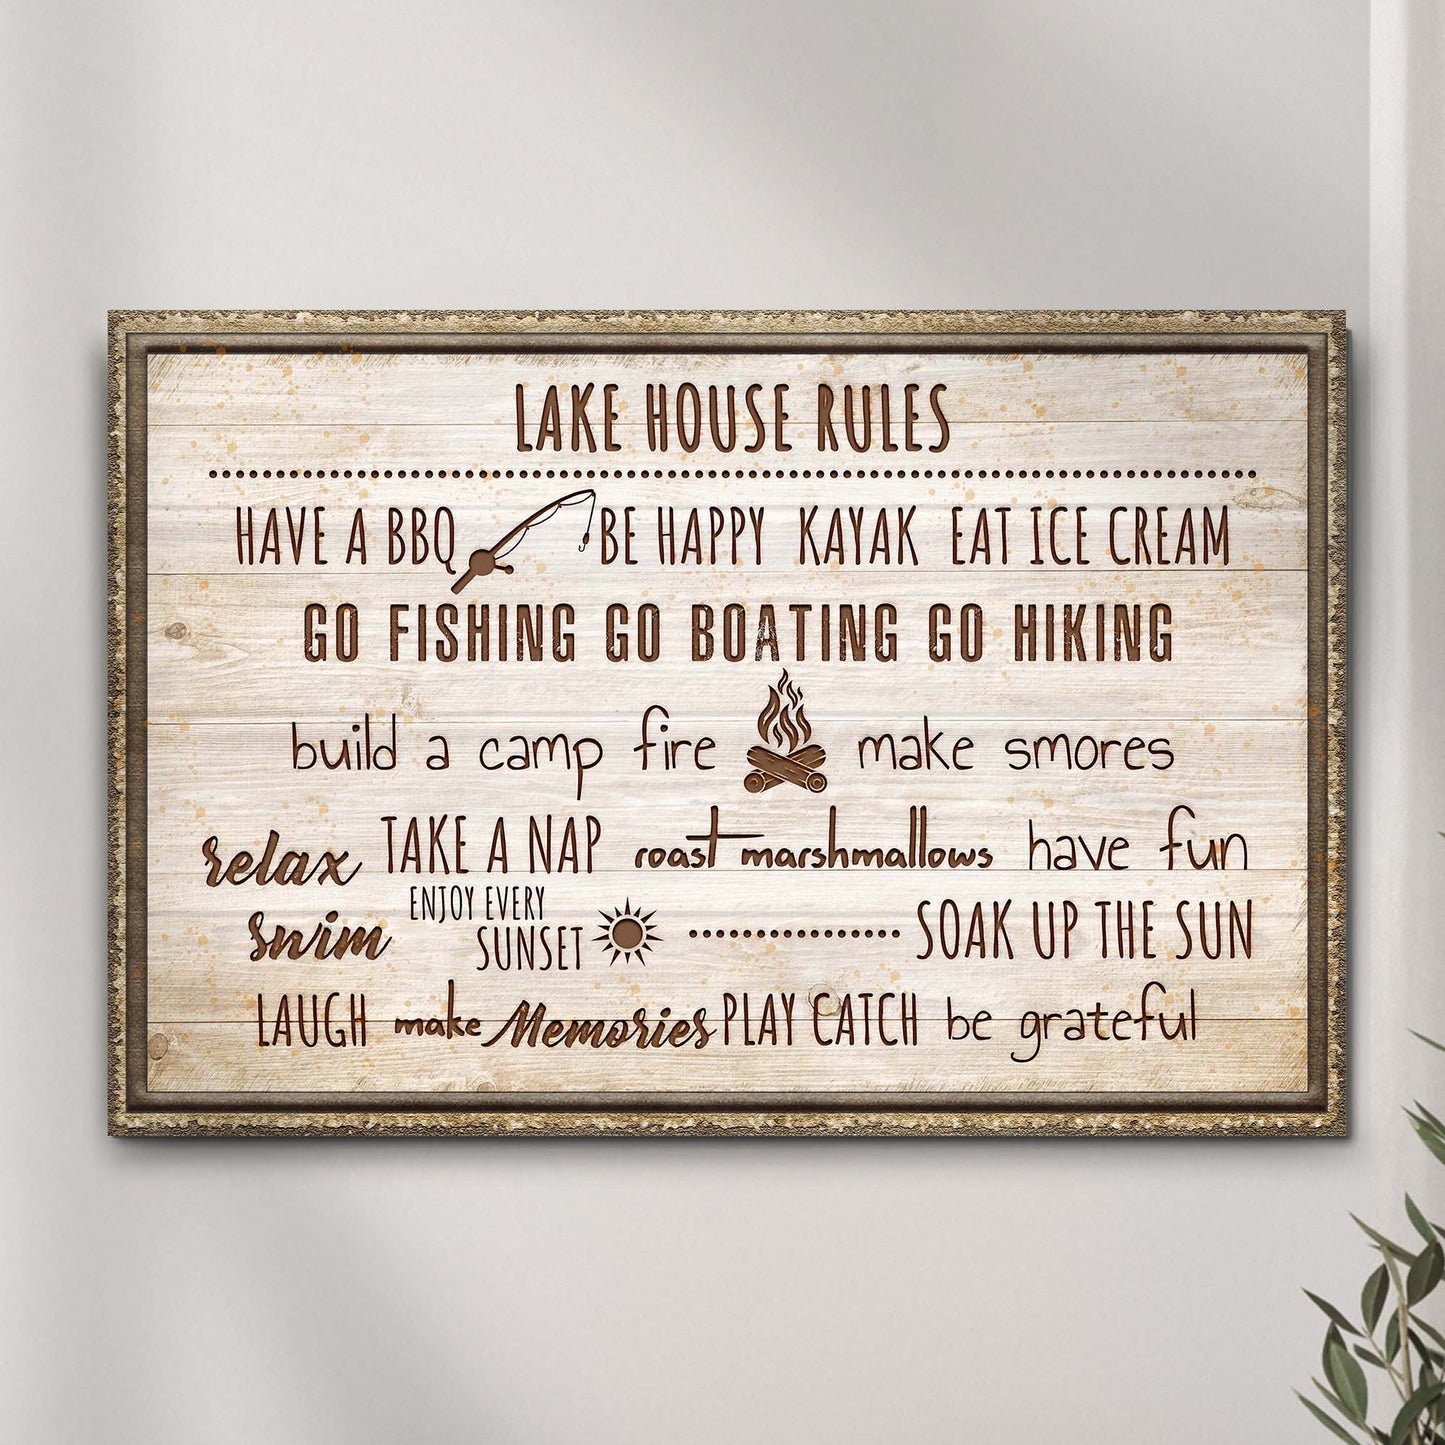 Lake House Rules Sign - Image by Tailored Canvases